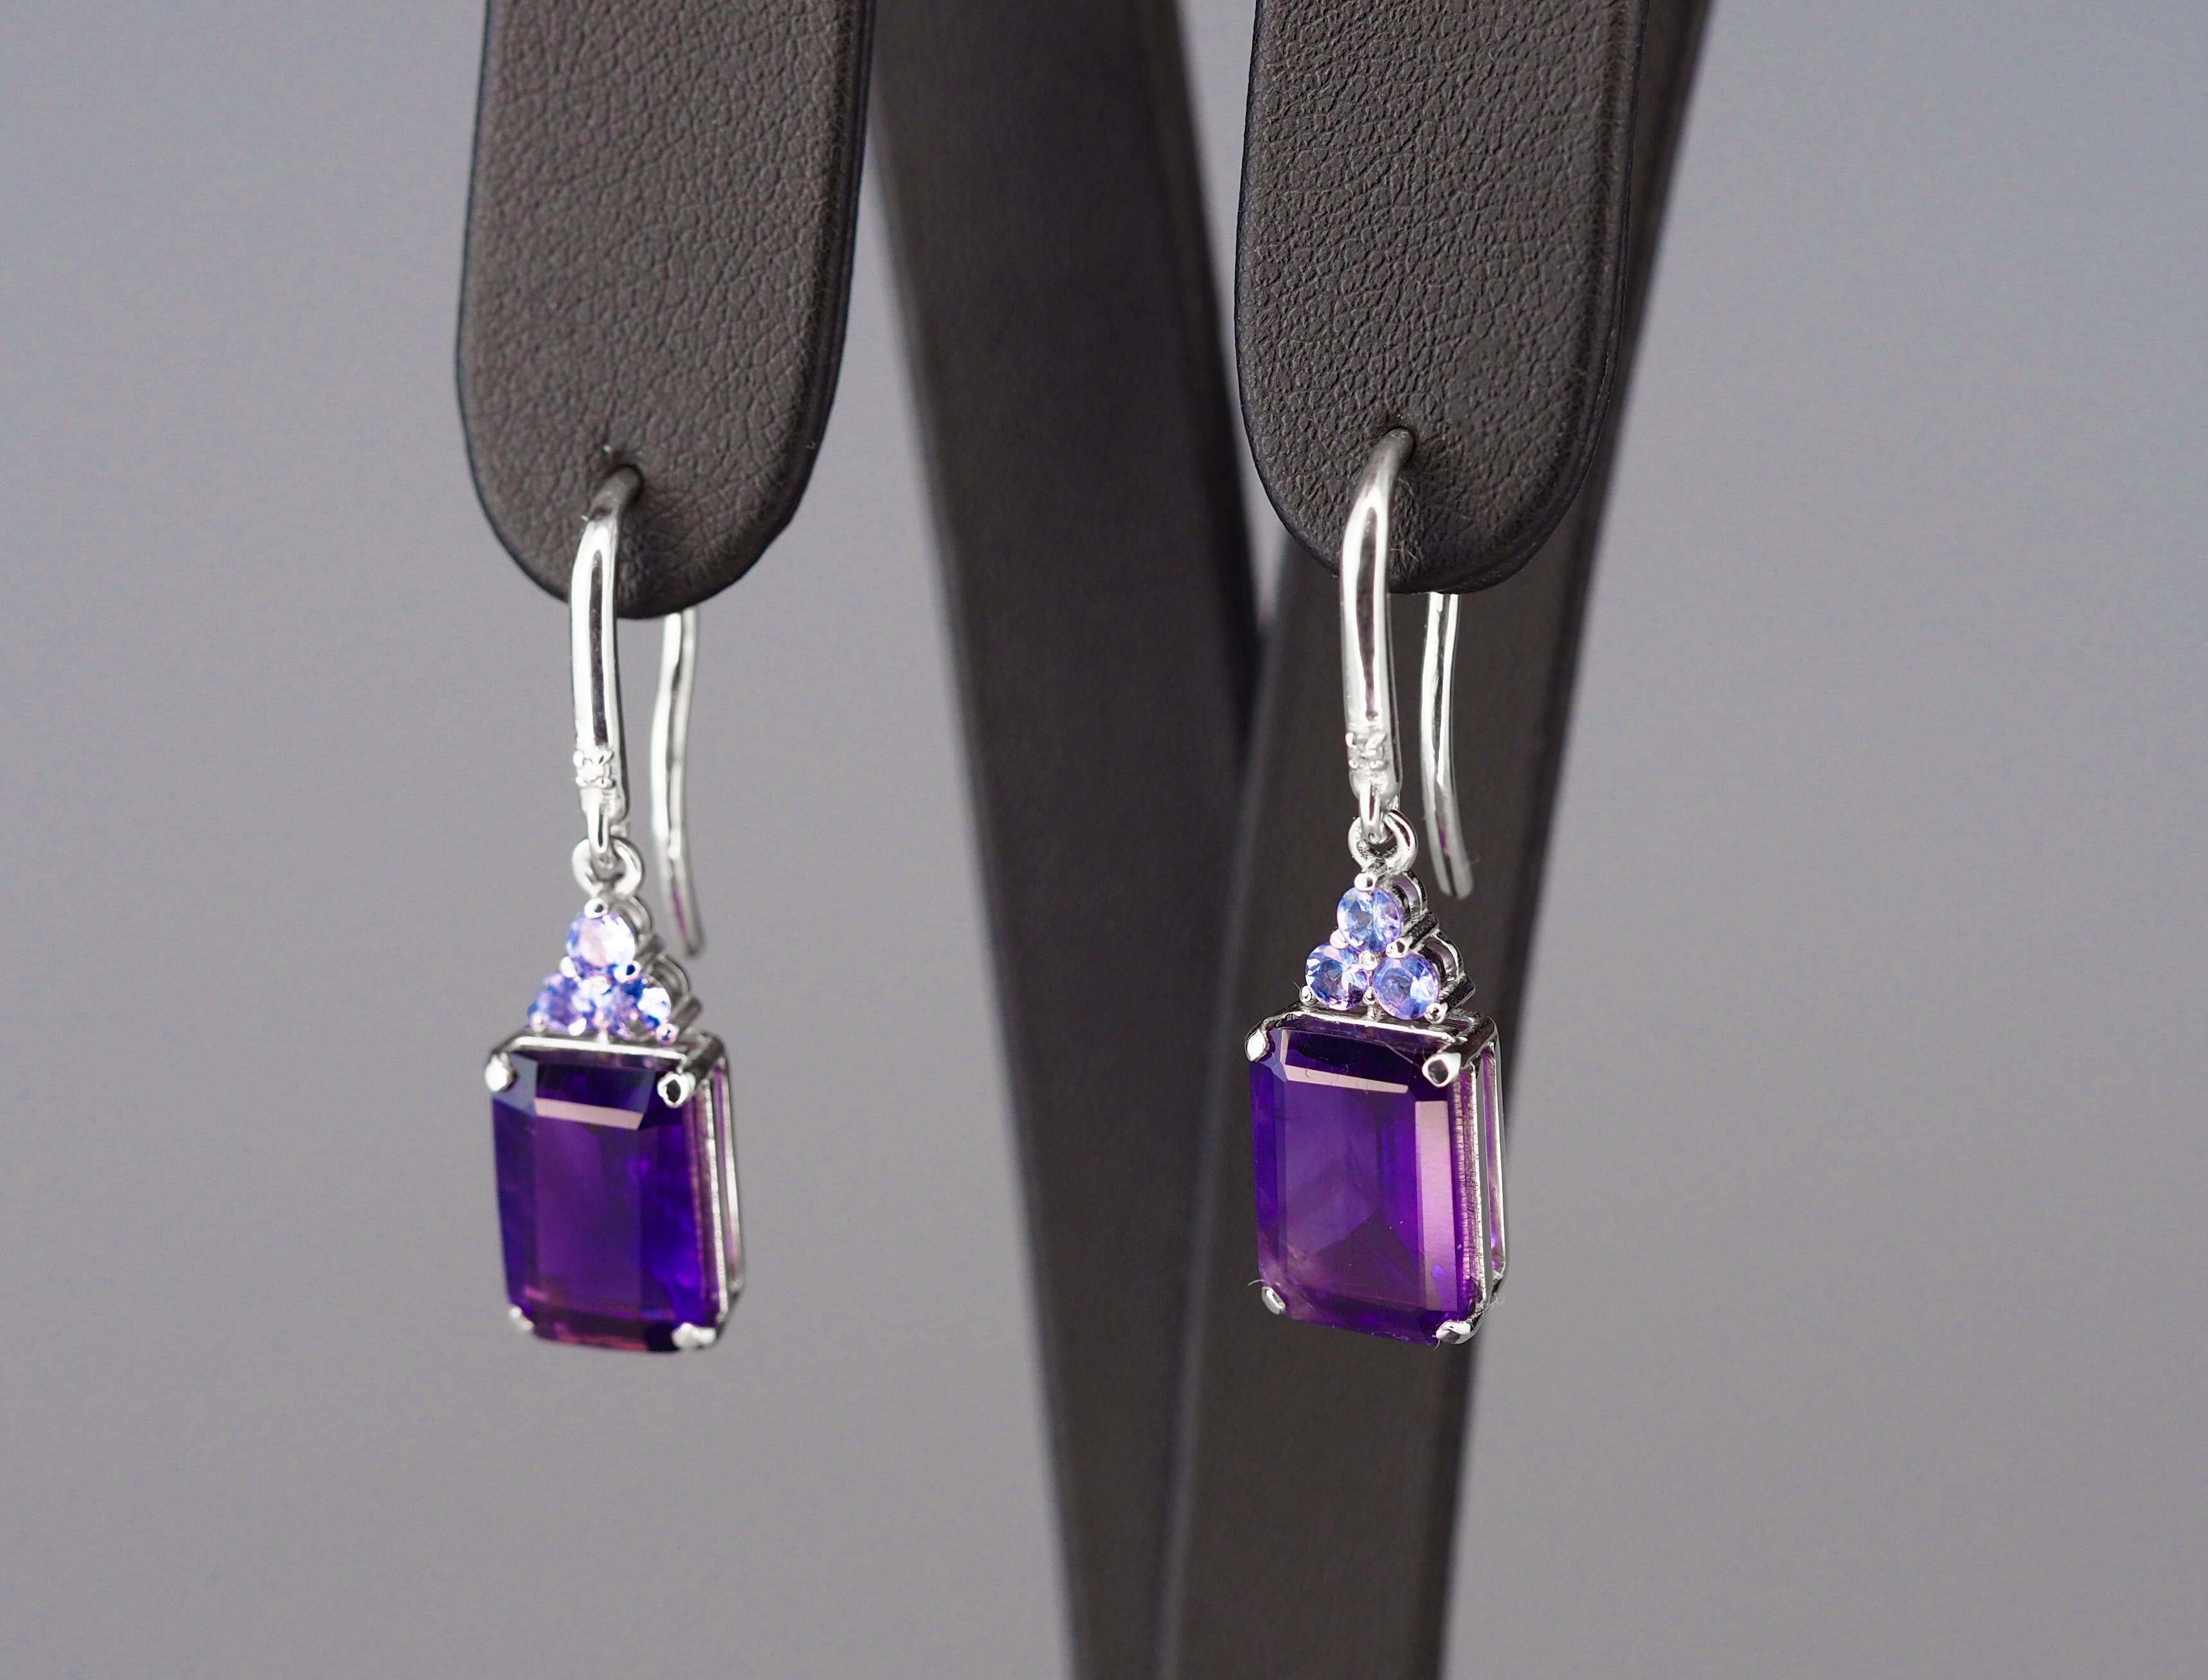 Emerald Cut 14 Kt White Gold Earrings with Amethysts, Tanzanites and Diamonds! For Sale